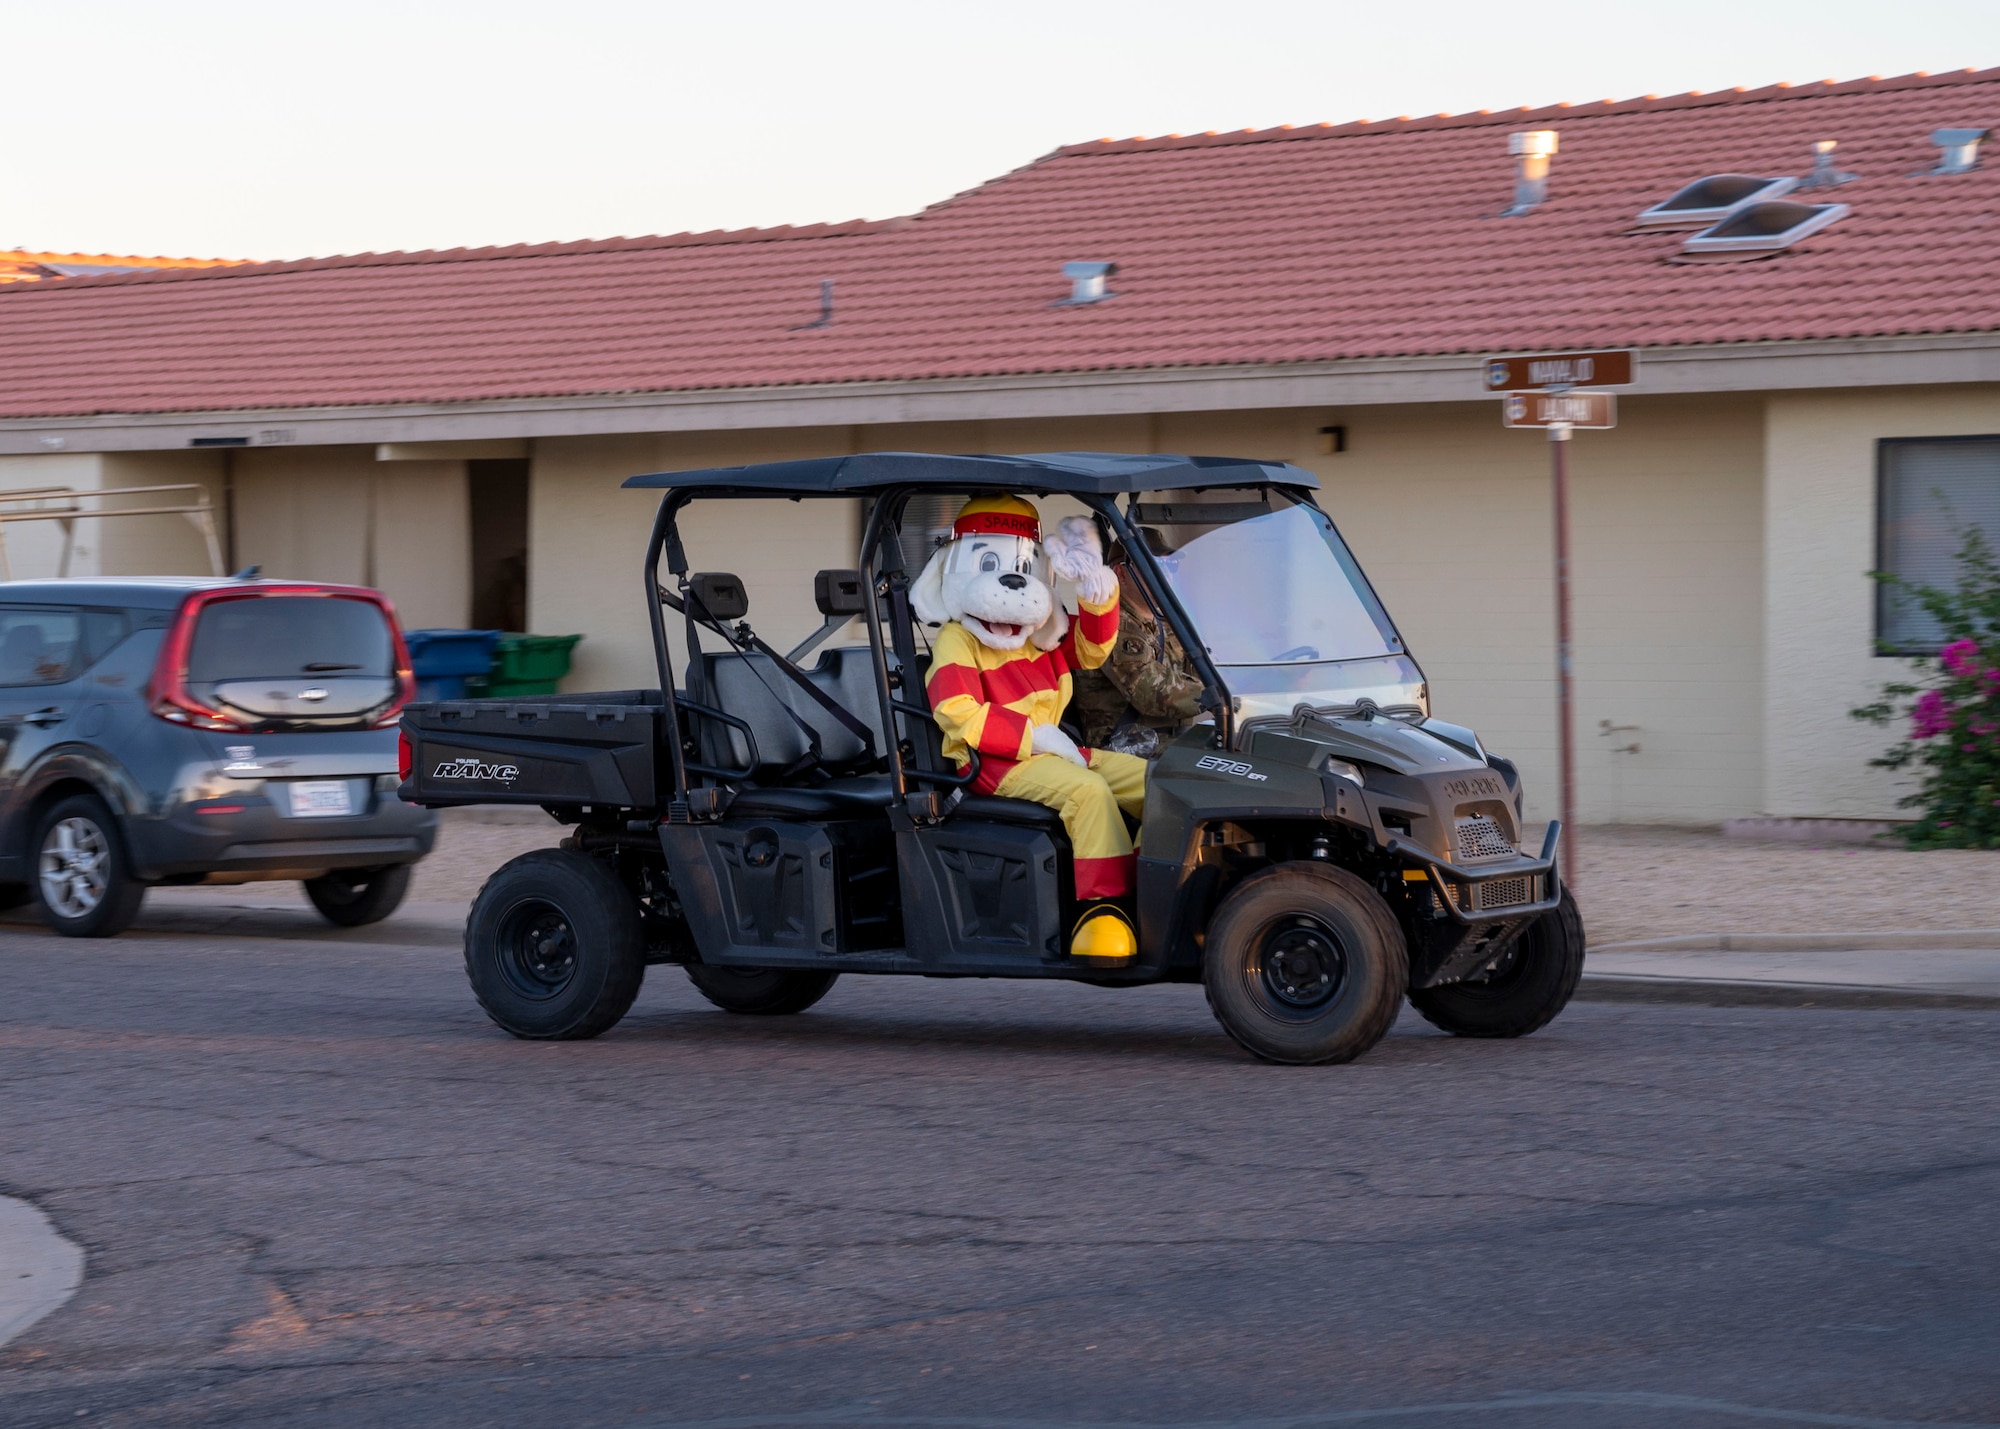 “Sparky”, 56th Civil Engineer Squadron Fire Department mascot, joins the parade through base housing Oct. 13, 2022, at Luke Air Force Base, Arizona.